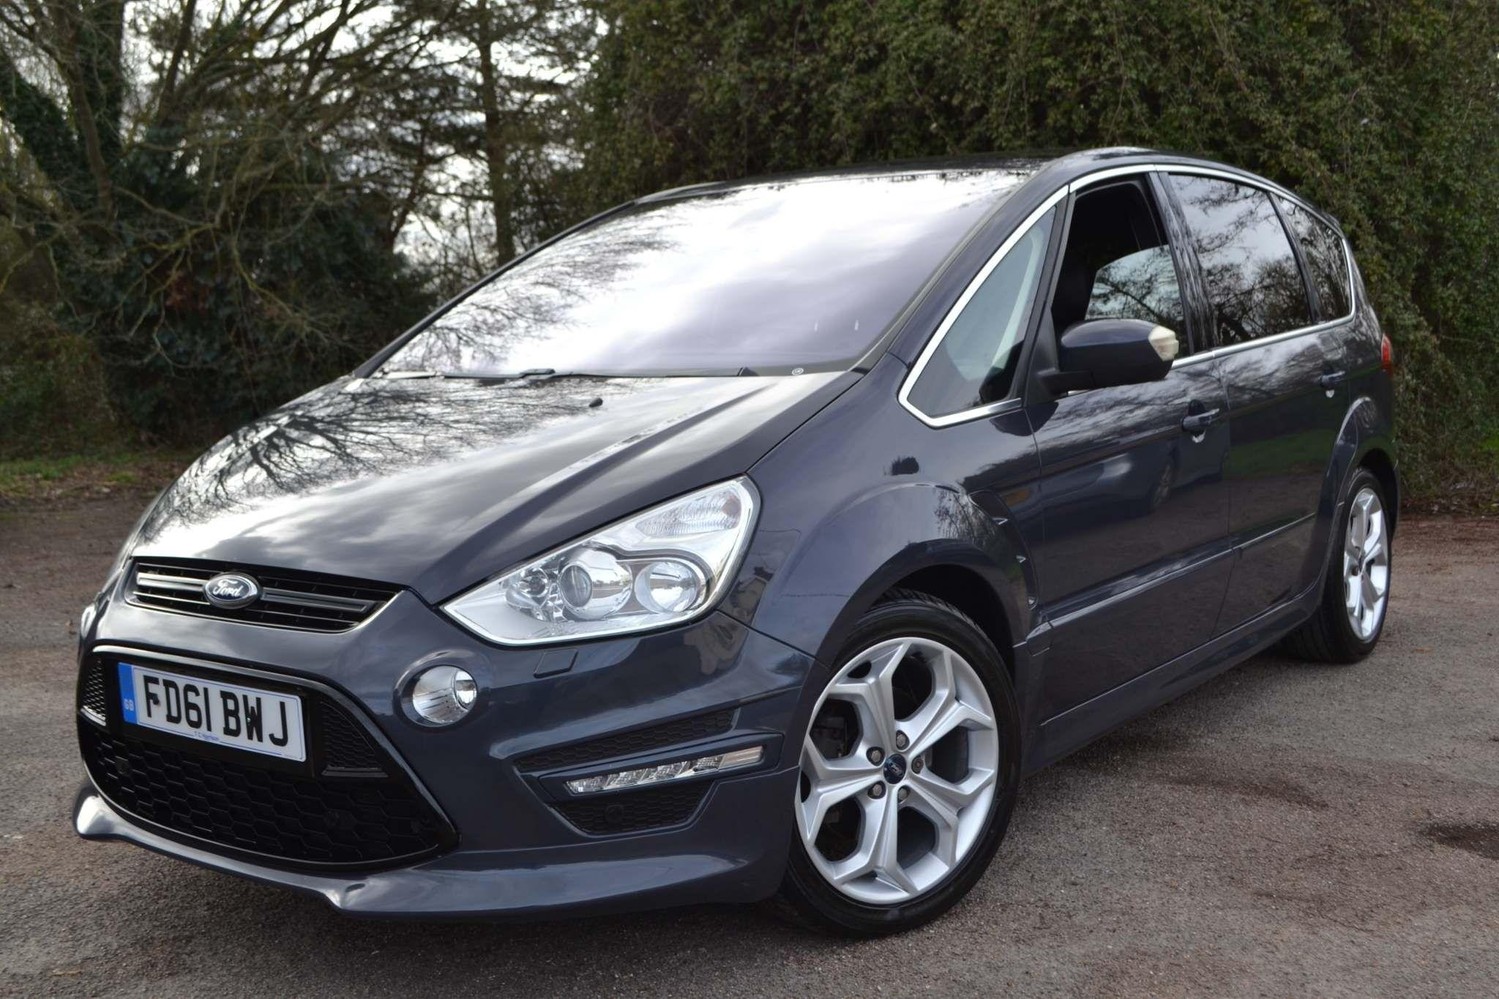 Used FORD S-MAX in Manningtree, Essex